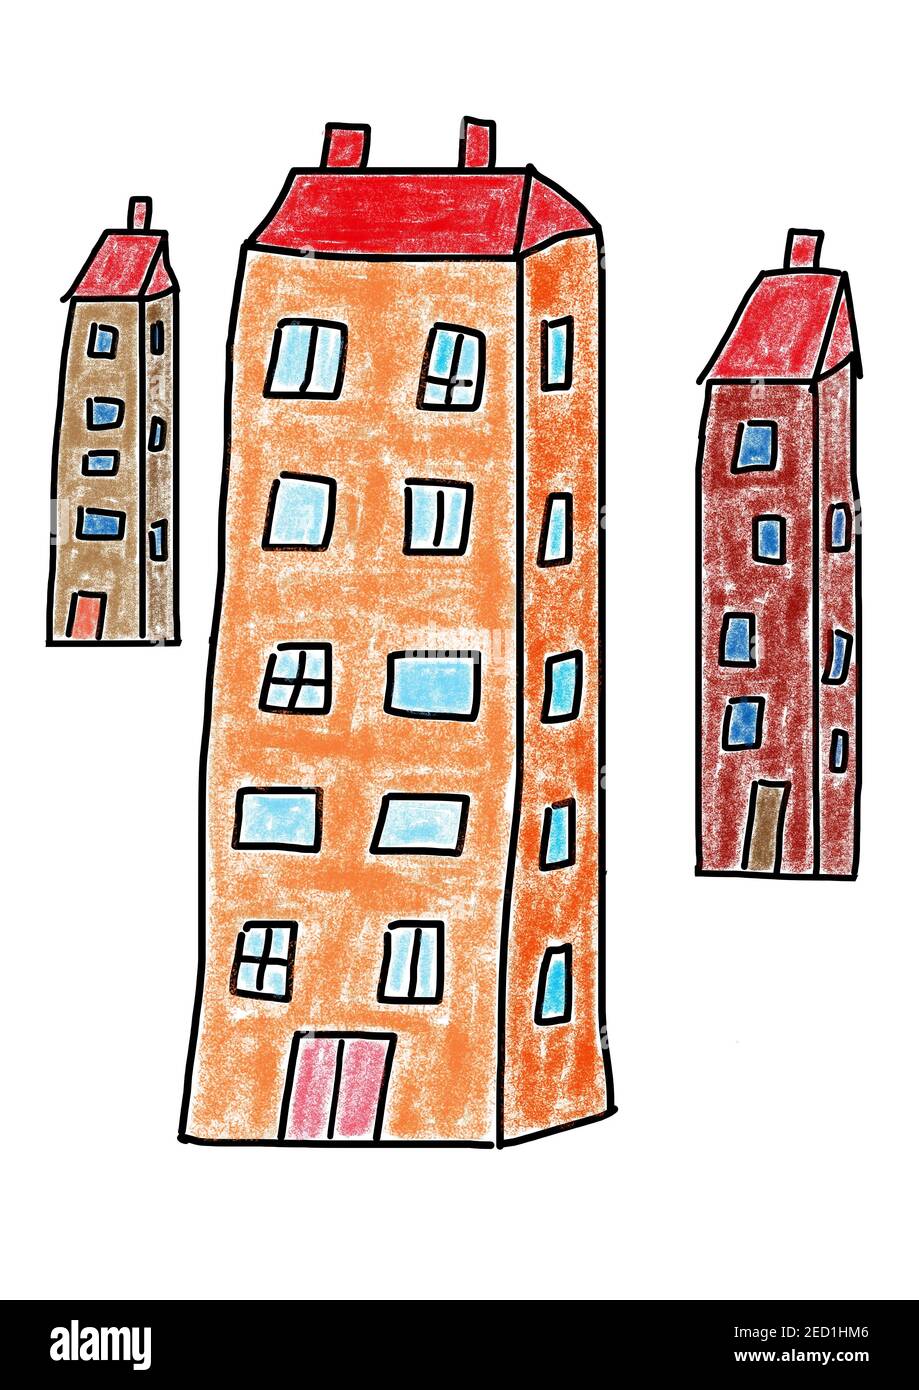 Children Drawing Cartoon House Building Commercial Elements PNG Images | AI  Free Download - Pikbest